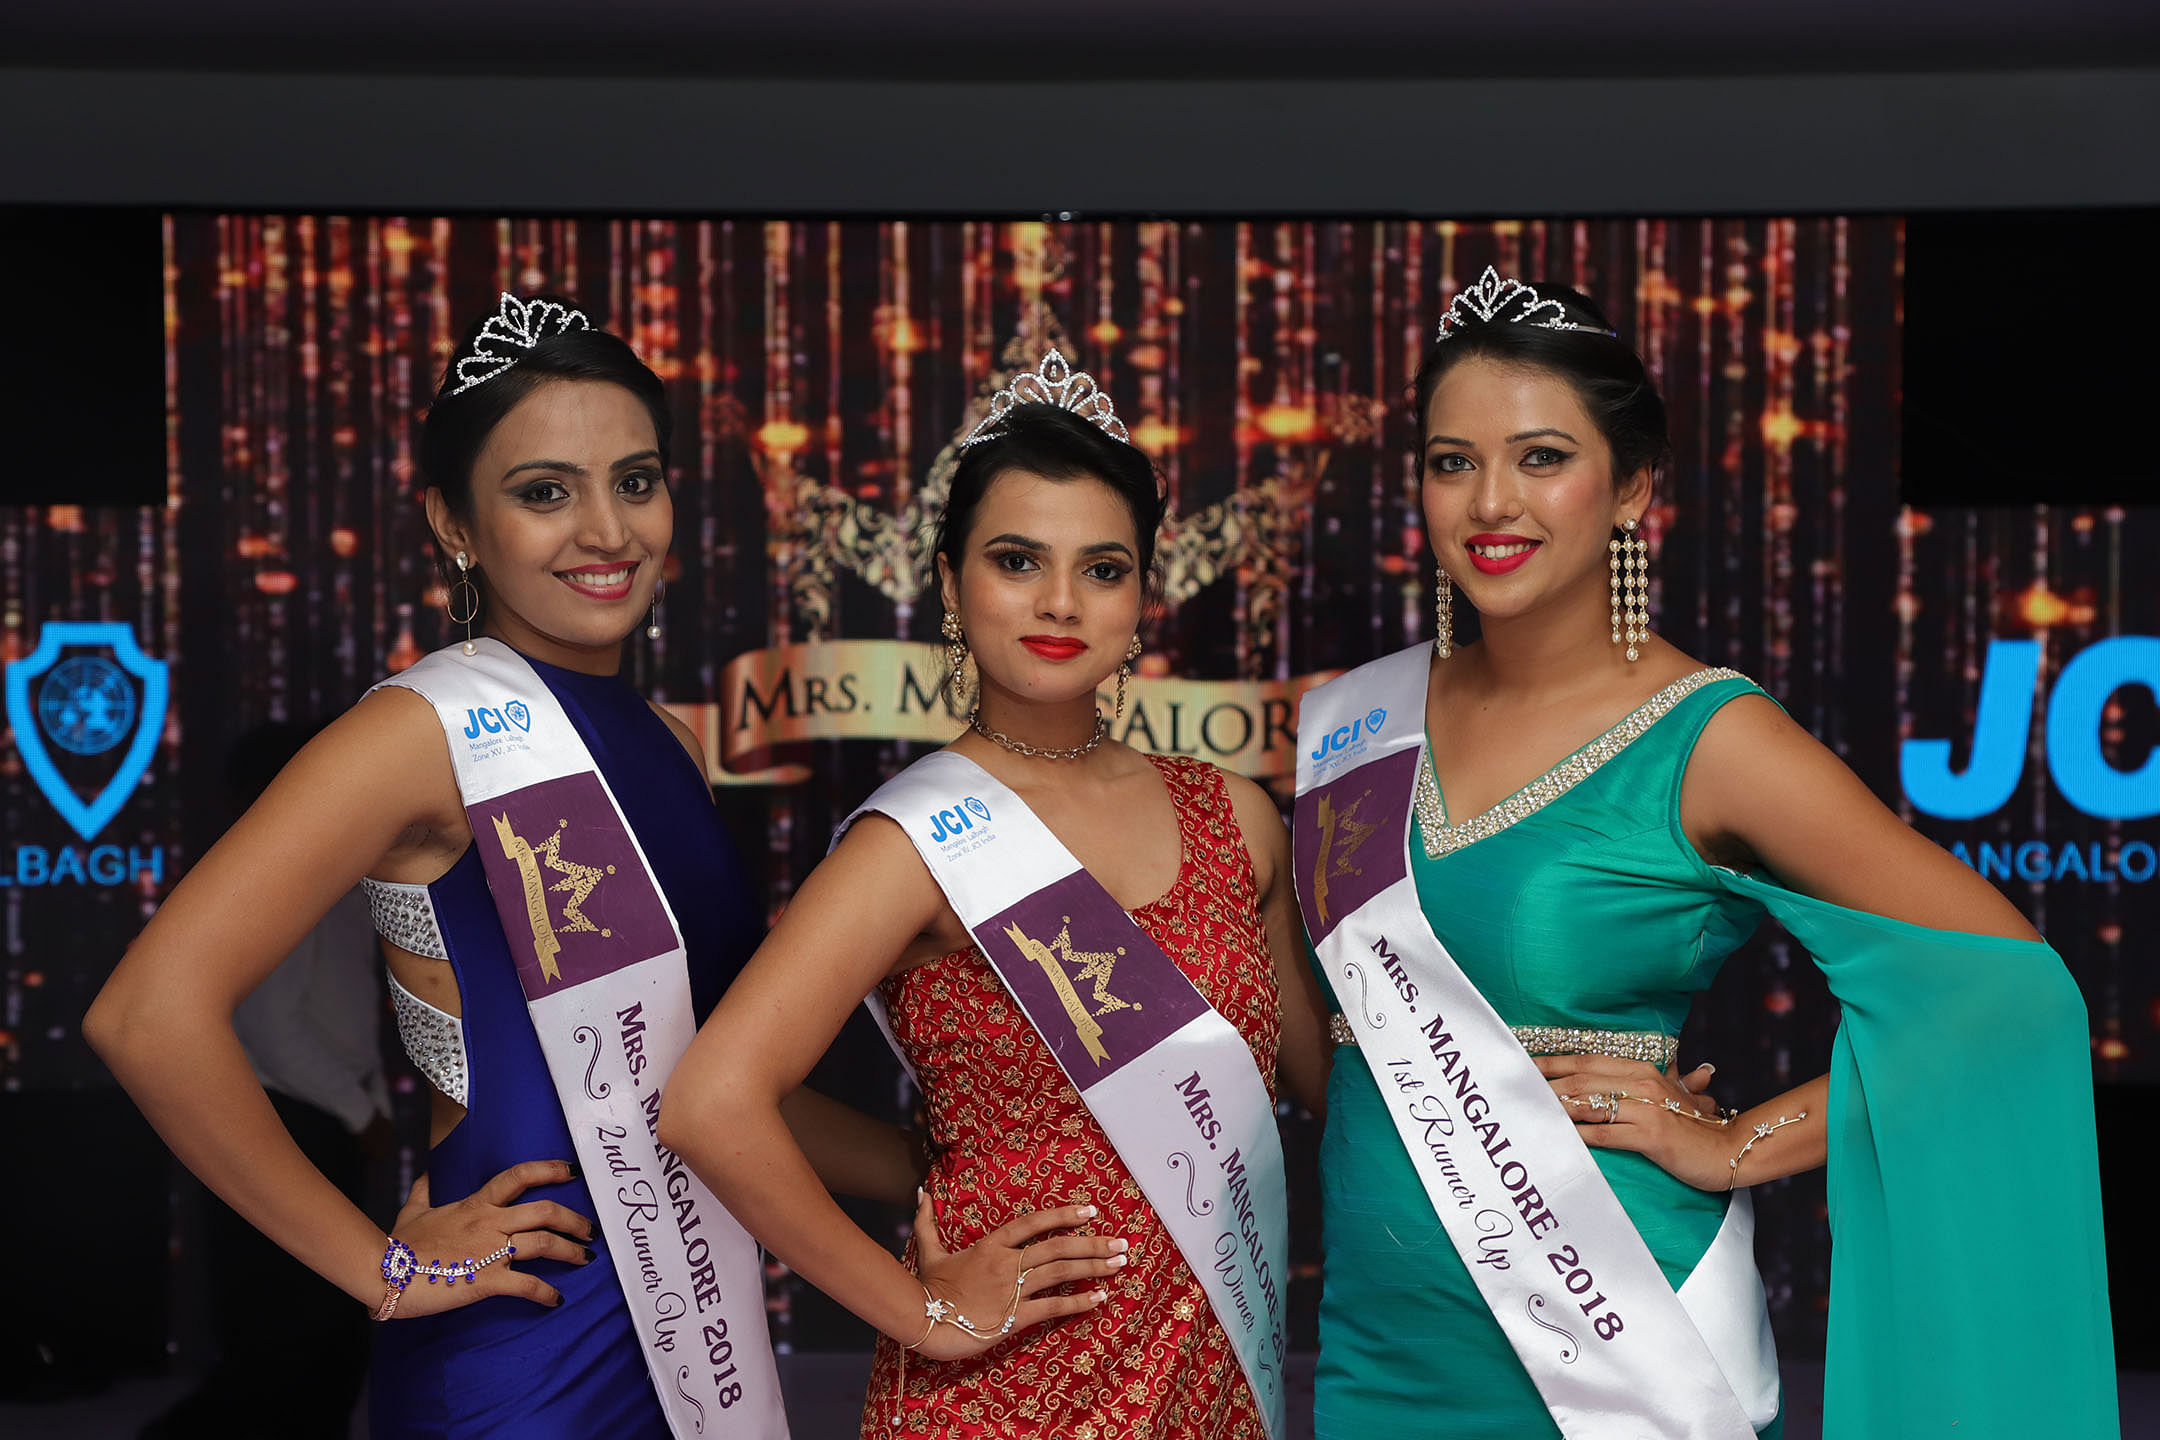 Sudheeksha Kiran, who was crowned Mrs Mangalore 2018, flanked by Hera Pinto and Angelita Lewis who won the first and second runners-up titles respectively.